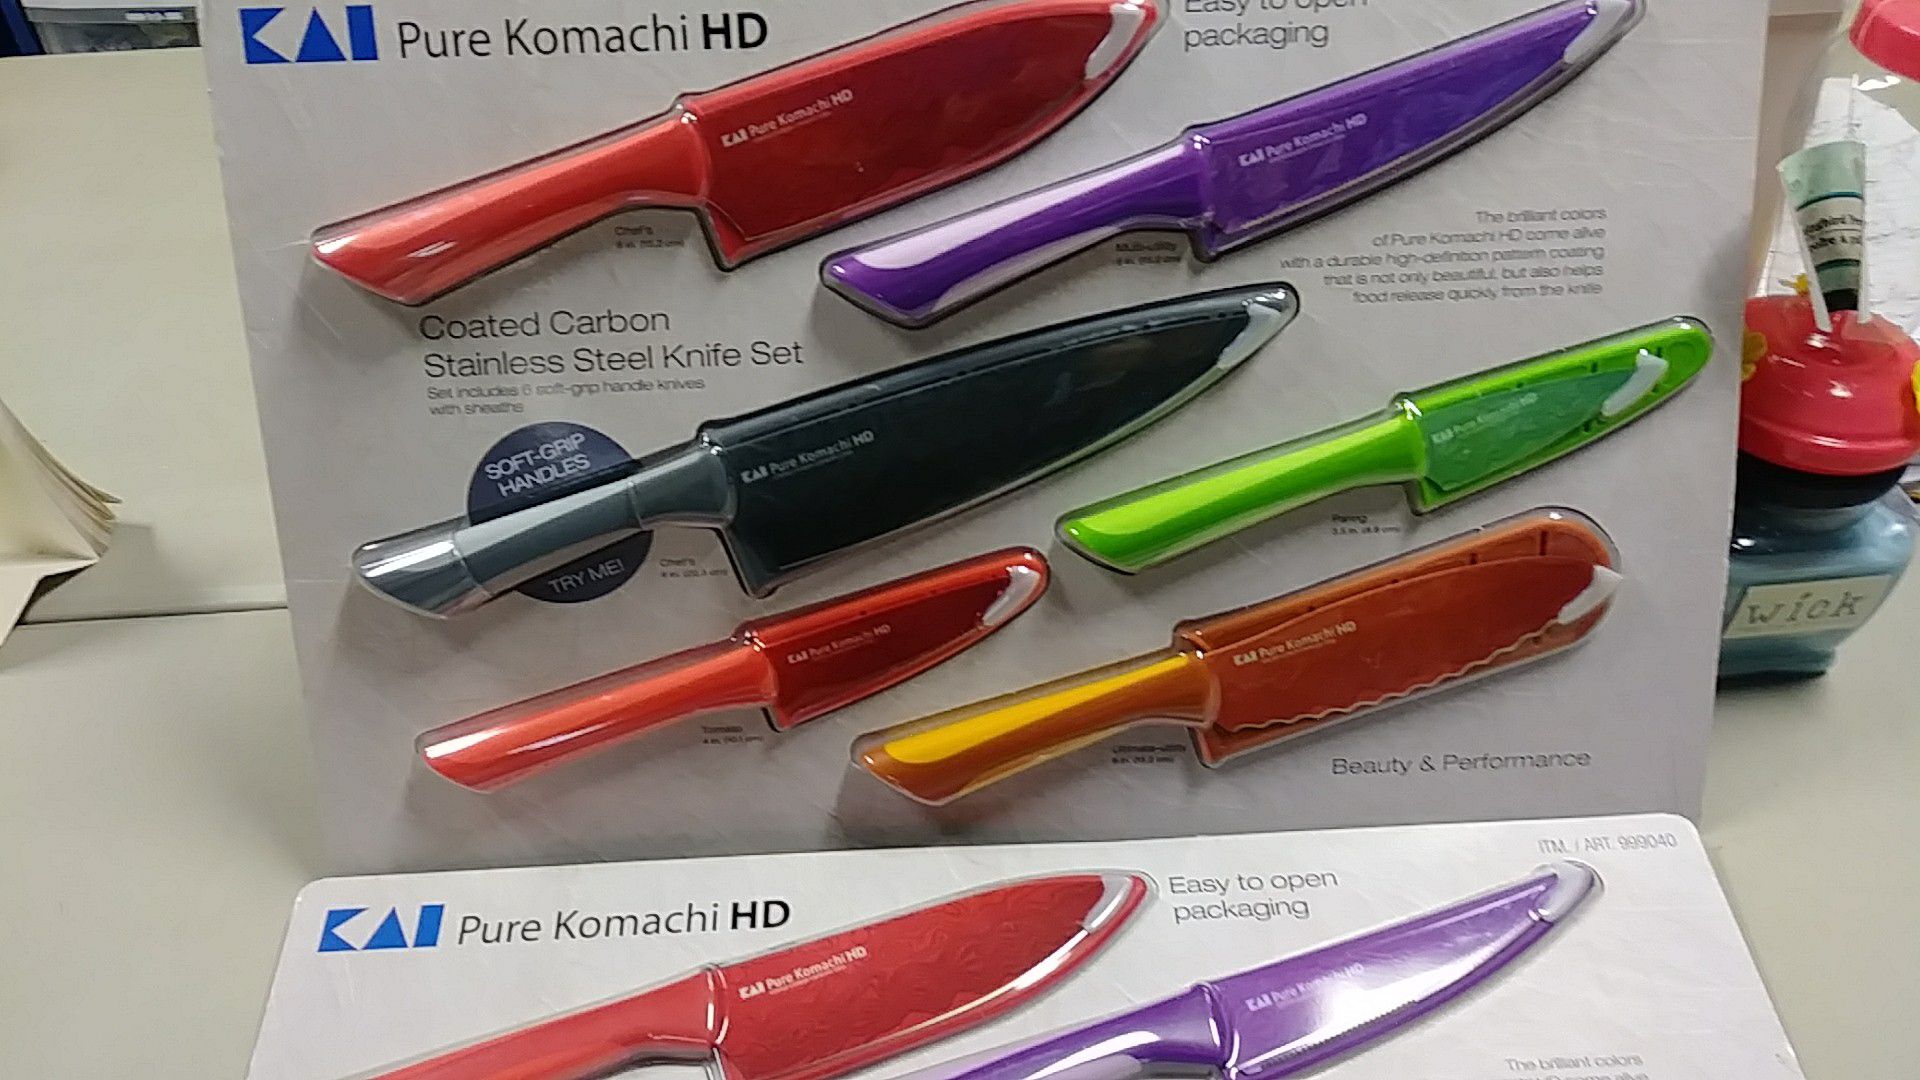 KOMACHI HD COATED CARBON STAINLESS STEEL KNIFE SET